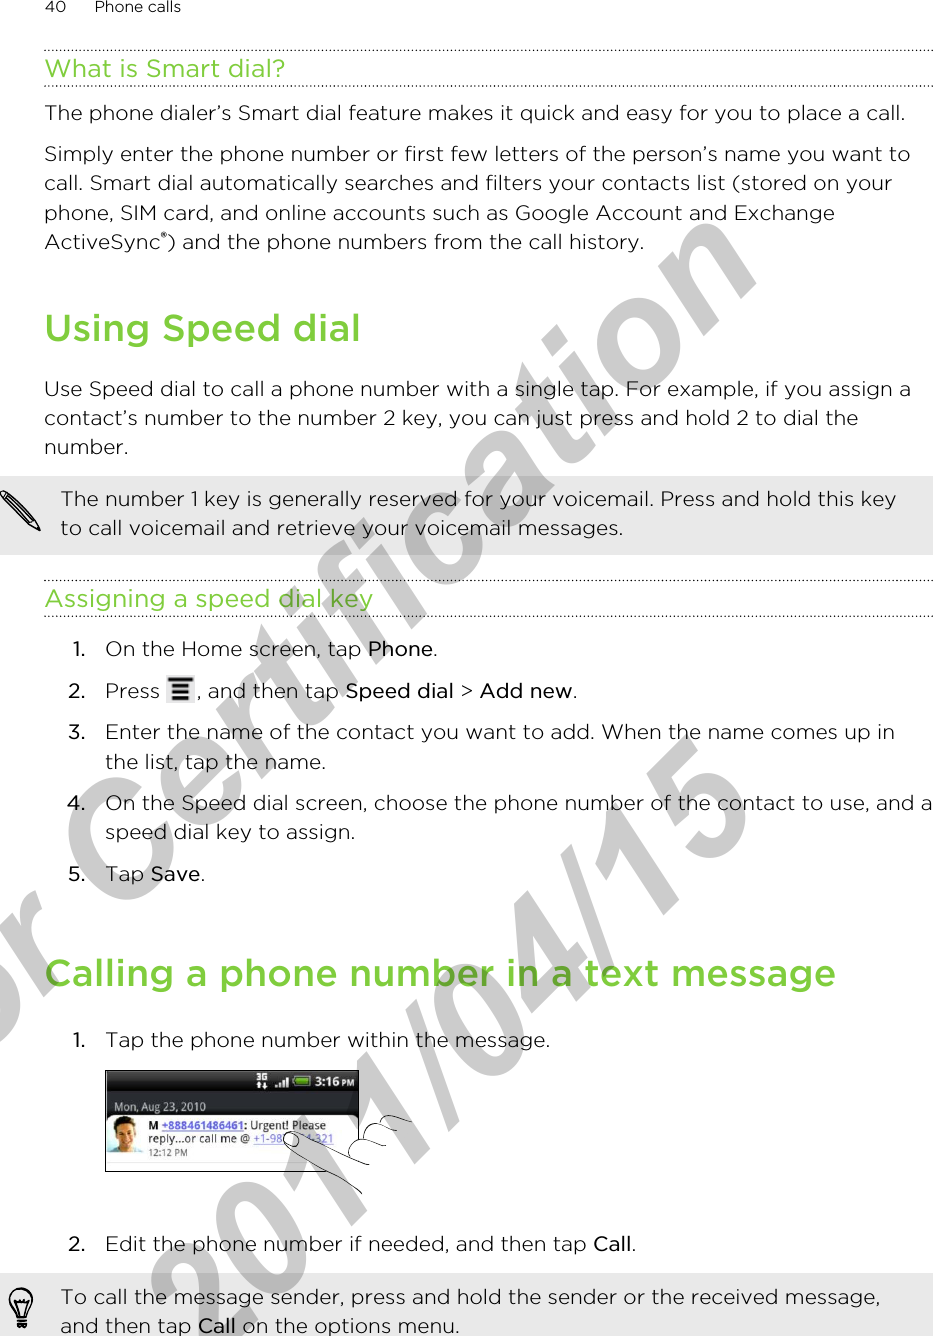 What is Smart dial?The phone dialer’s Smart dial feature makes it quick and easy for you to place a call.Simply enter the phone number or first few letters of the person’s name you want tocall. Smart dial automatically searches and filters your contacts list (stored on yourphone, SIM card, and online accounts such as Google Account and ExchangeActiveSync®) and the phone numbers from the call history.Using Speed dialUse Speed dial to call a phone number with a single tap. For example, if you assign acontact’s number to the number 2 key, you can just press and hold 2 to dial thenumber.The number 1 key is generally reserved for your voicemail. Press and hold this keyto call voicemail and retrieve your voicemail messages.Assigning a speed dial key1. On the Home screen, tap Phone.2. Press  , and then tap Speed dial &gt; Add new.3. Enter the name of the contact you want to add. When the name comes up inthe list, tap the name.4. On the Speed dial screen, choose the phone number of the contact to use, and aspeed dial key to assign.5. Tap Save.Calling a phone number in a text message1. Tap the phone number within the message. 2. Edit the phone number if needed, and then tap Call. To call the message sender, press and hold the sender or the received message,and then tap Call on the options menu.40 Phone callsfor Certification  2011/04/15